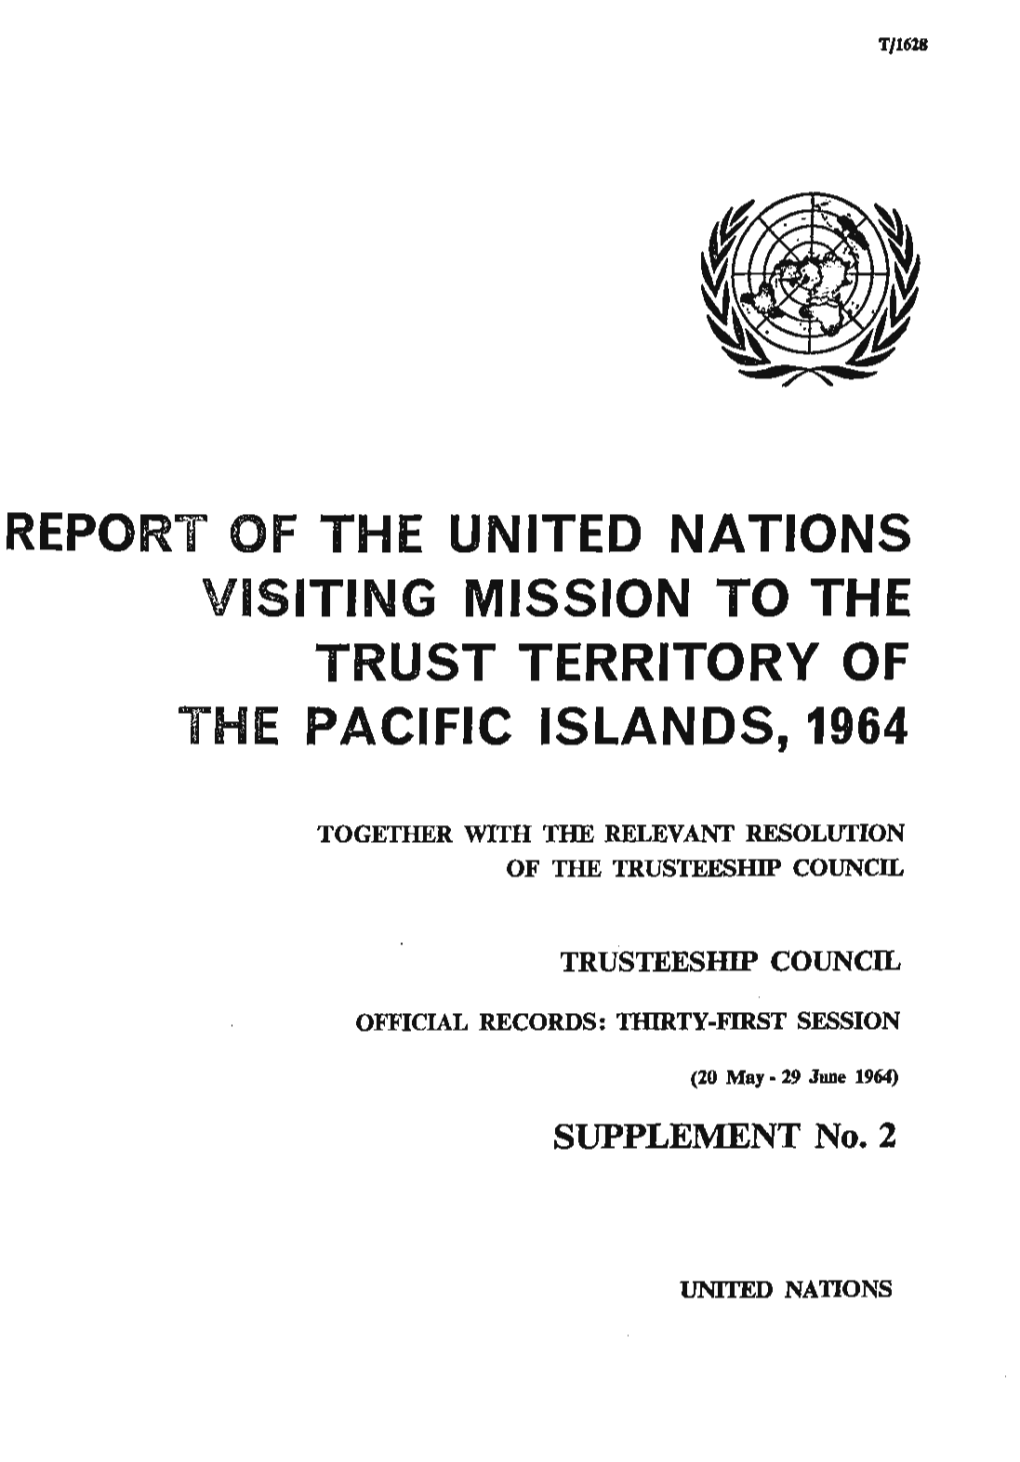 Visiting Mission to the Trust Territory of the Pacific Islands, 1964